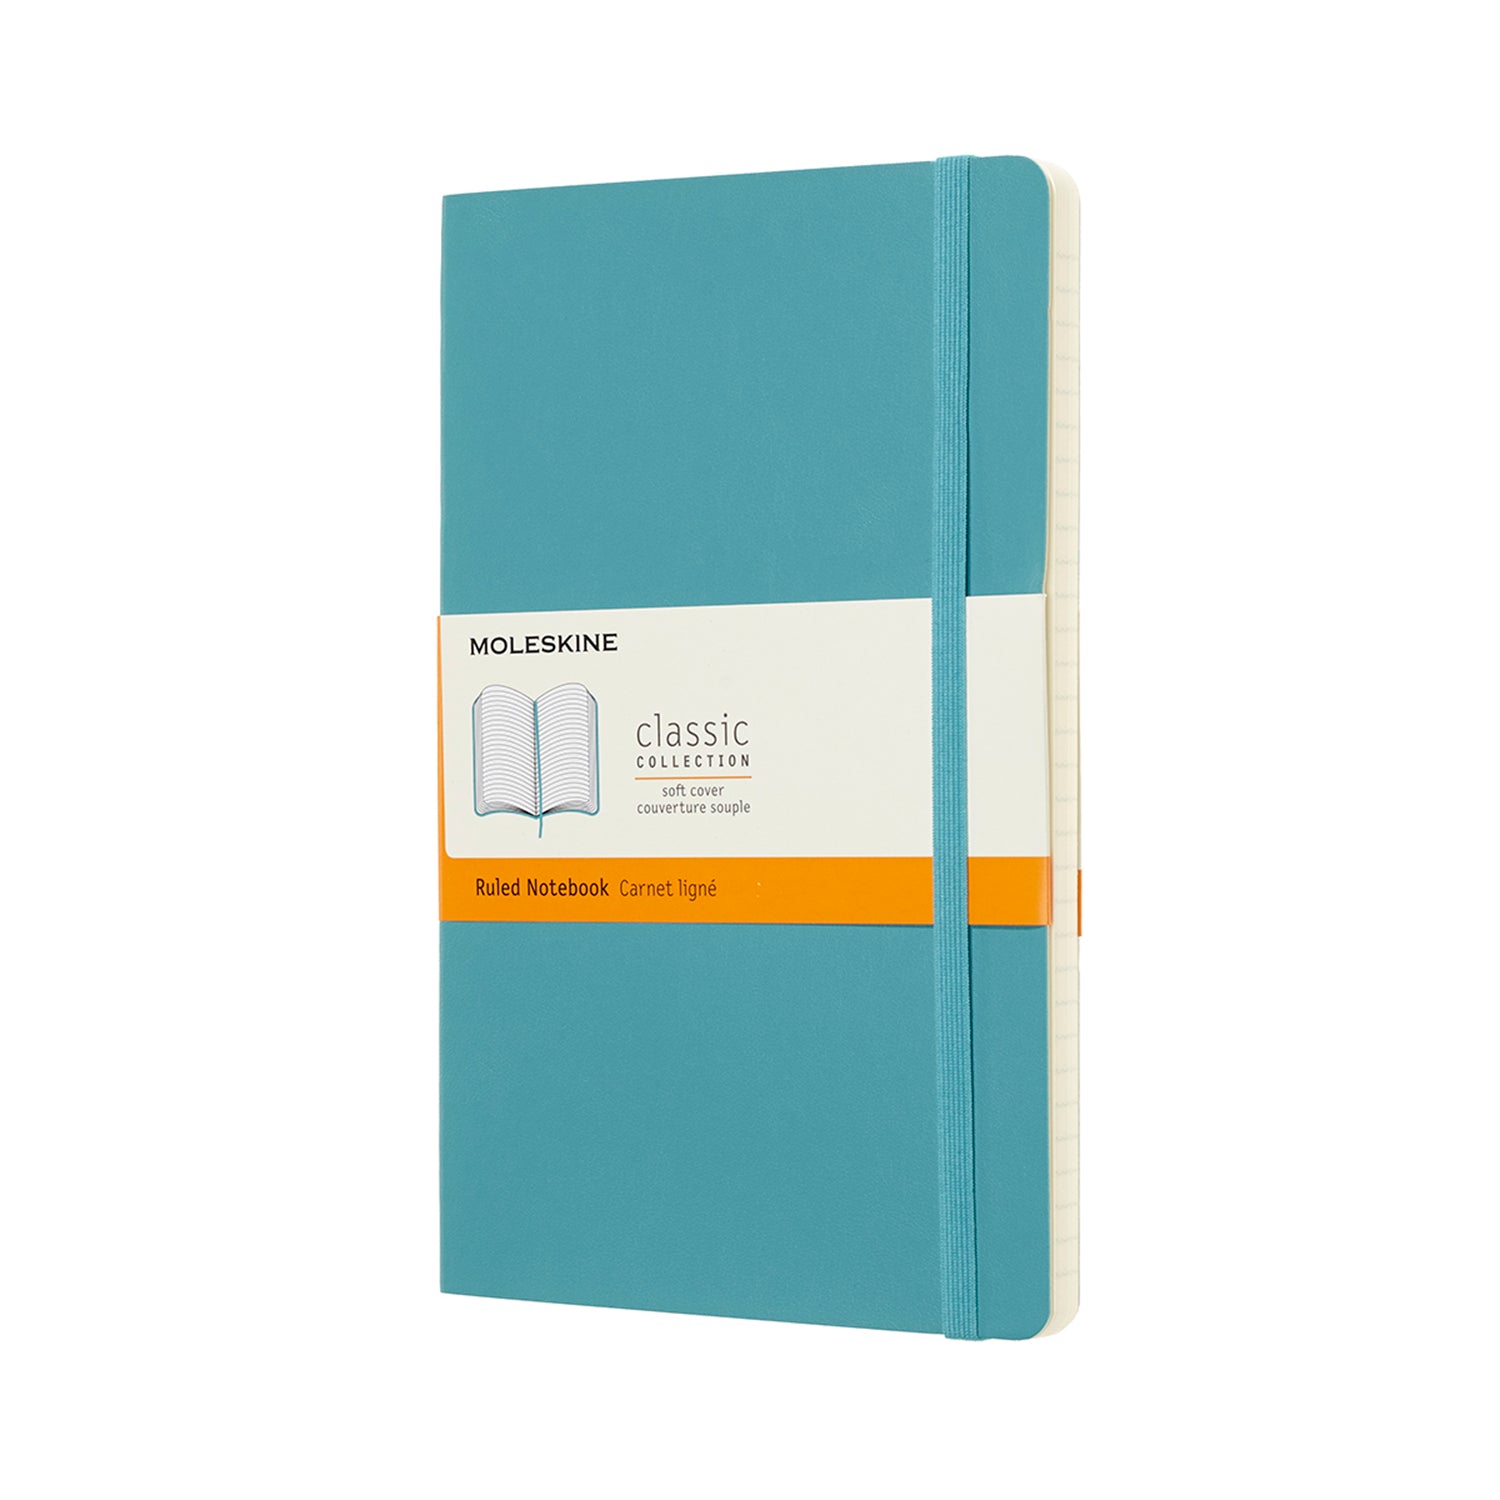 Moleskine Notebook Classic Large Reef Blue Soft Cover - Lined